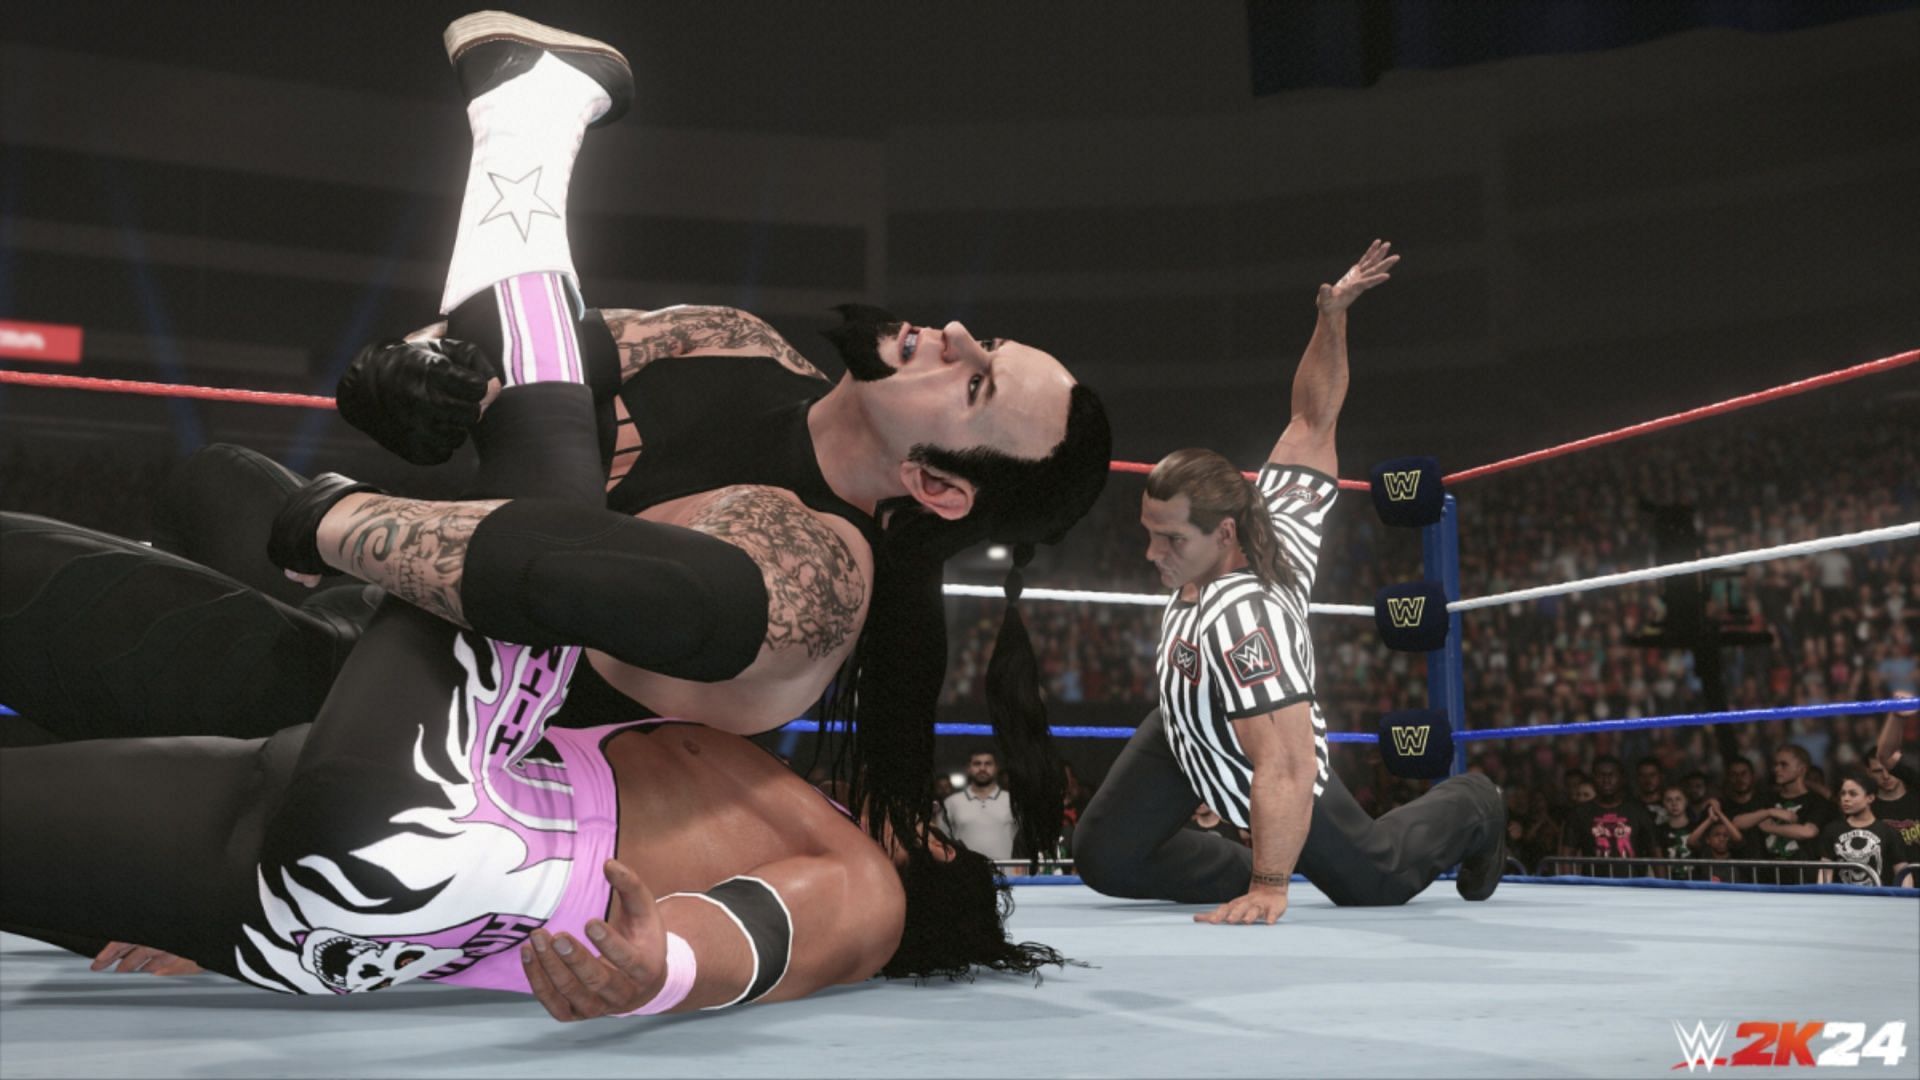 Relive some of the biggest moments in WrestleMania history in the upcoming 2K title (Image via 2K Games)